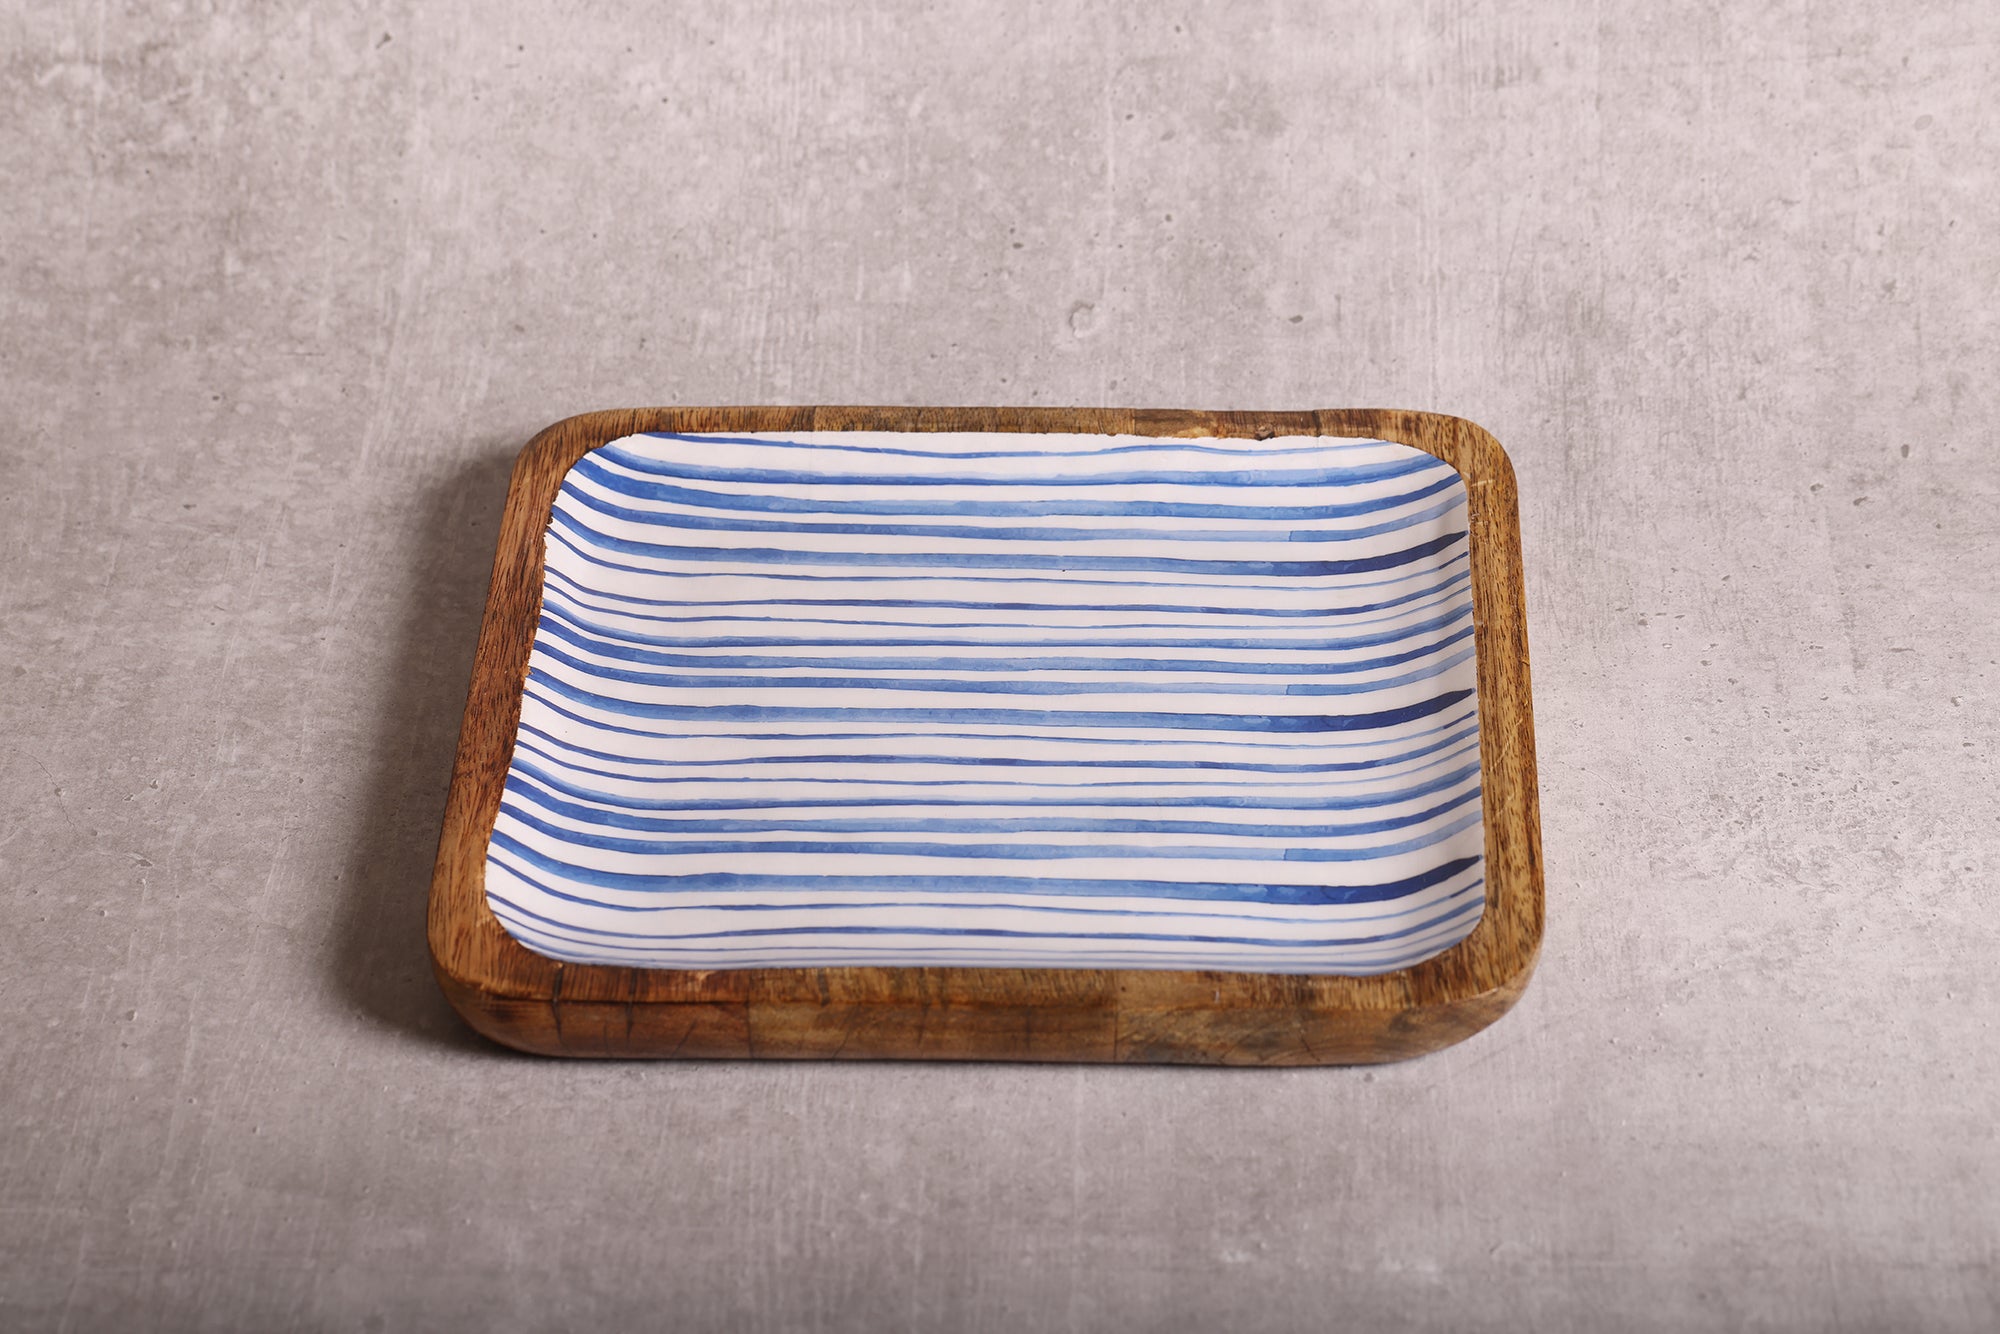 Stripe Love Blue Mango Wood Square Platter With Enamel Finish - 10 x 10 inches | Peacoy